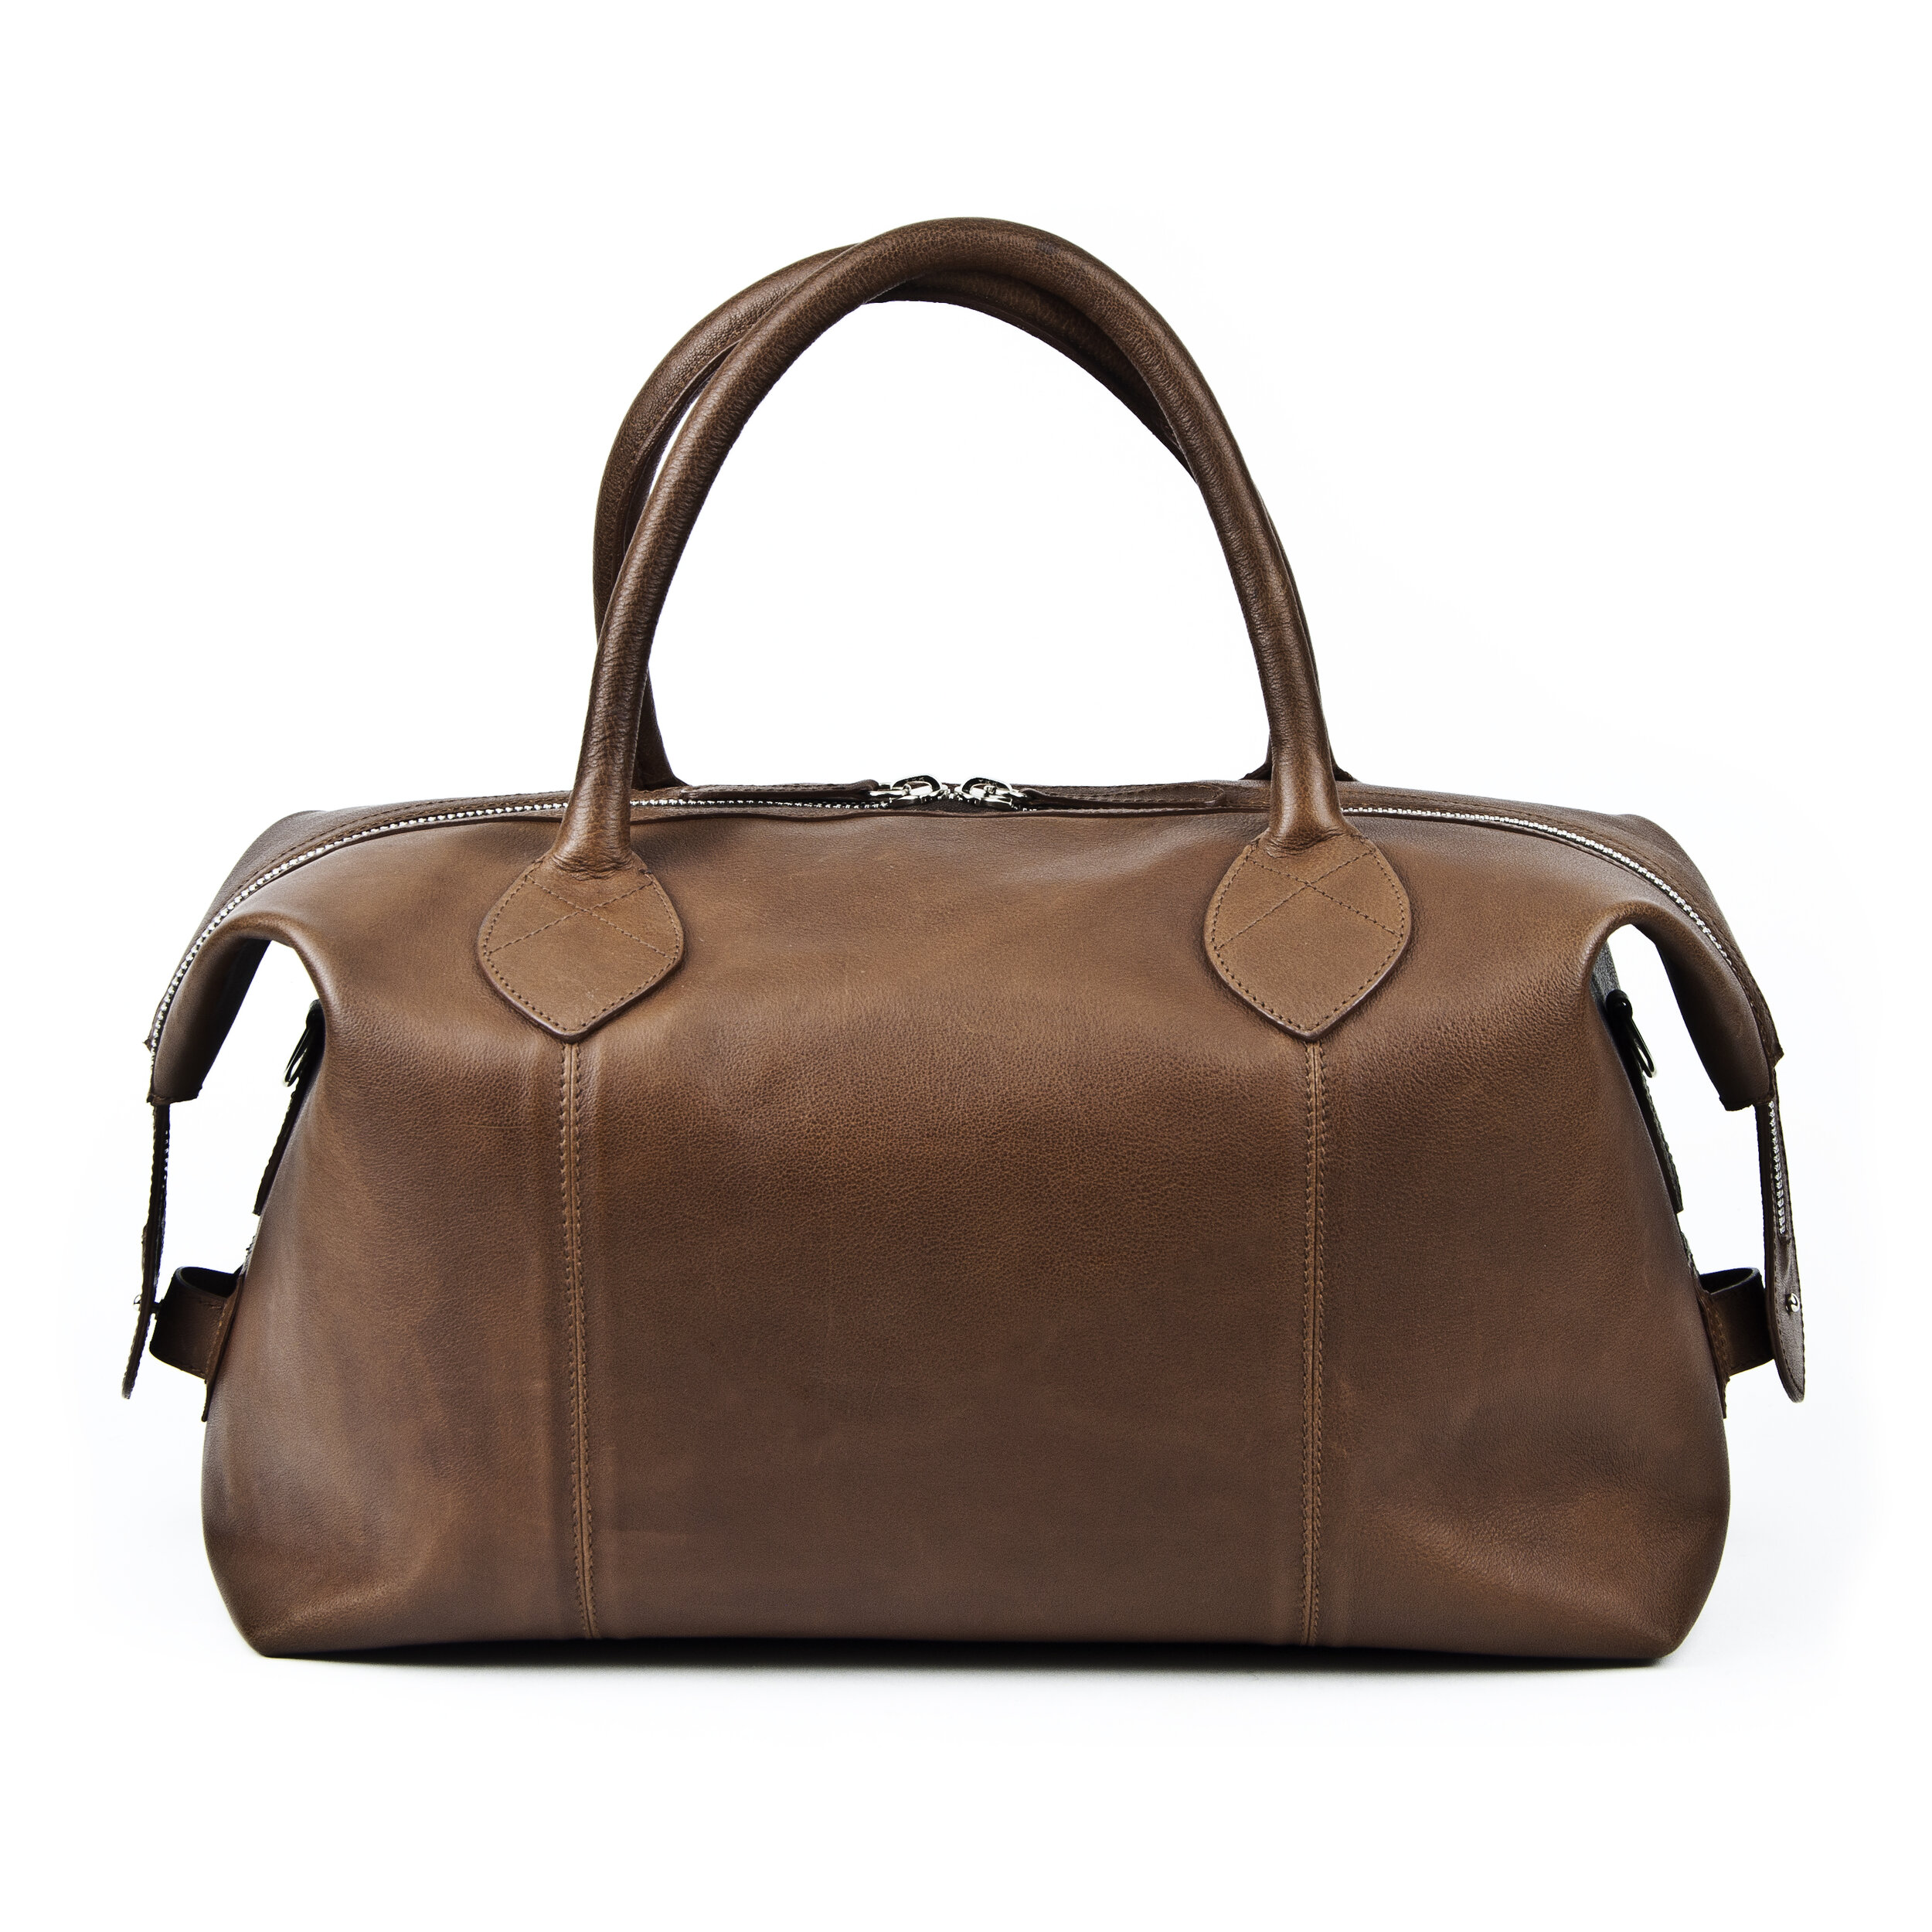 Handmade Leather Travel Bags - J.L. Rocha Collections - Handmade in Mexico